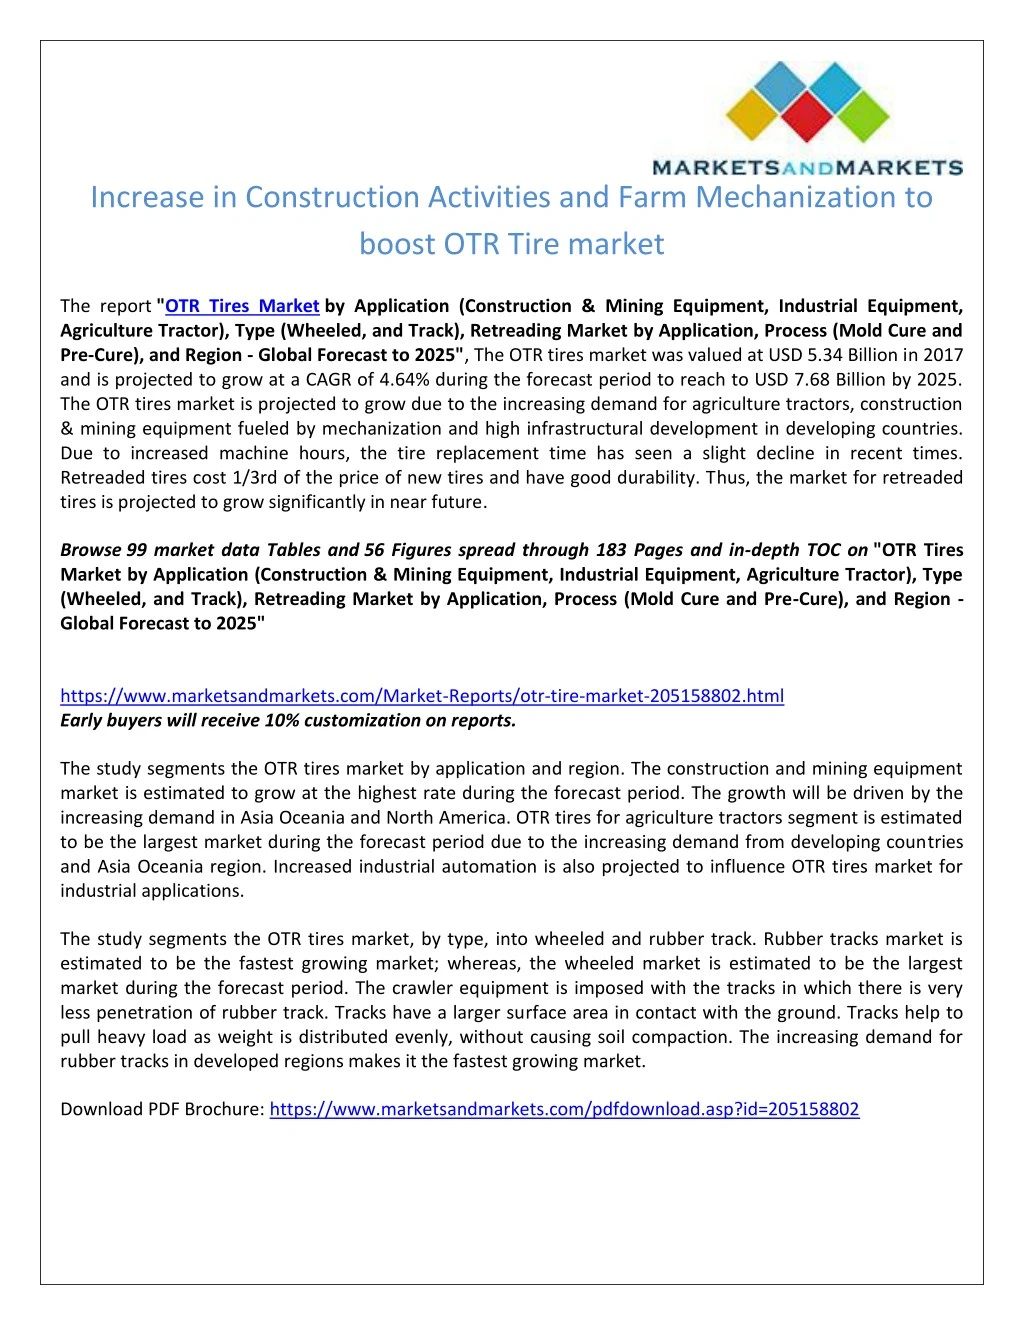 increase in construction activities and farm